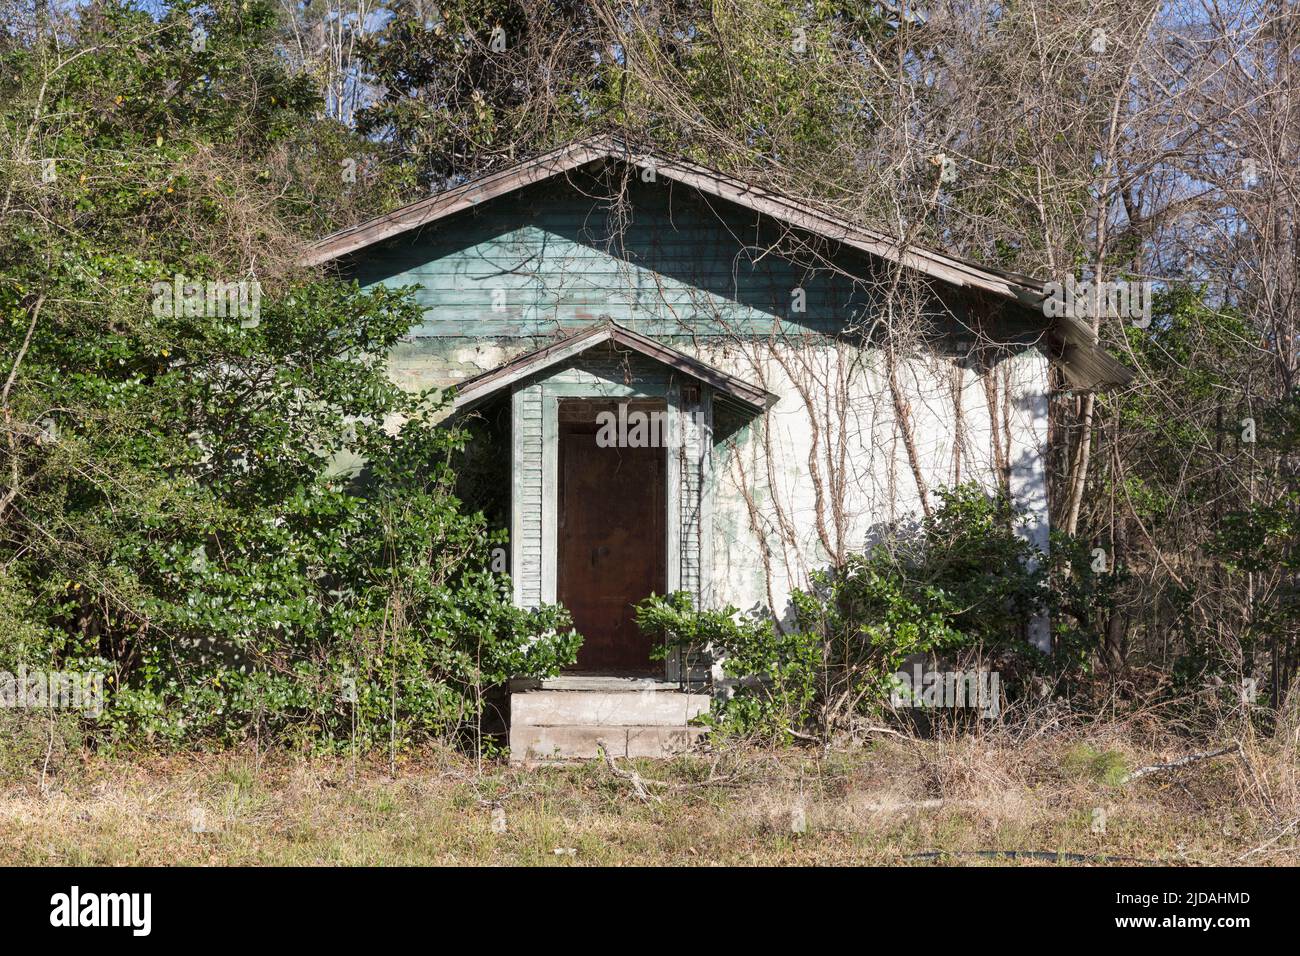 A rural homestead or small house abandoned and crumbling, overgrown with plants and shrubs. Stock Photo